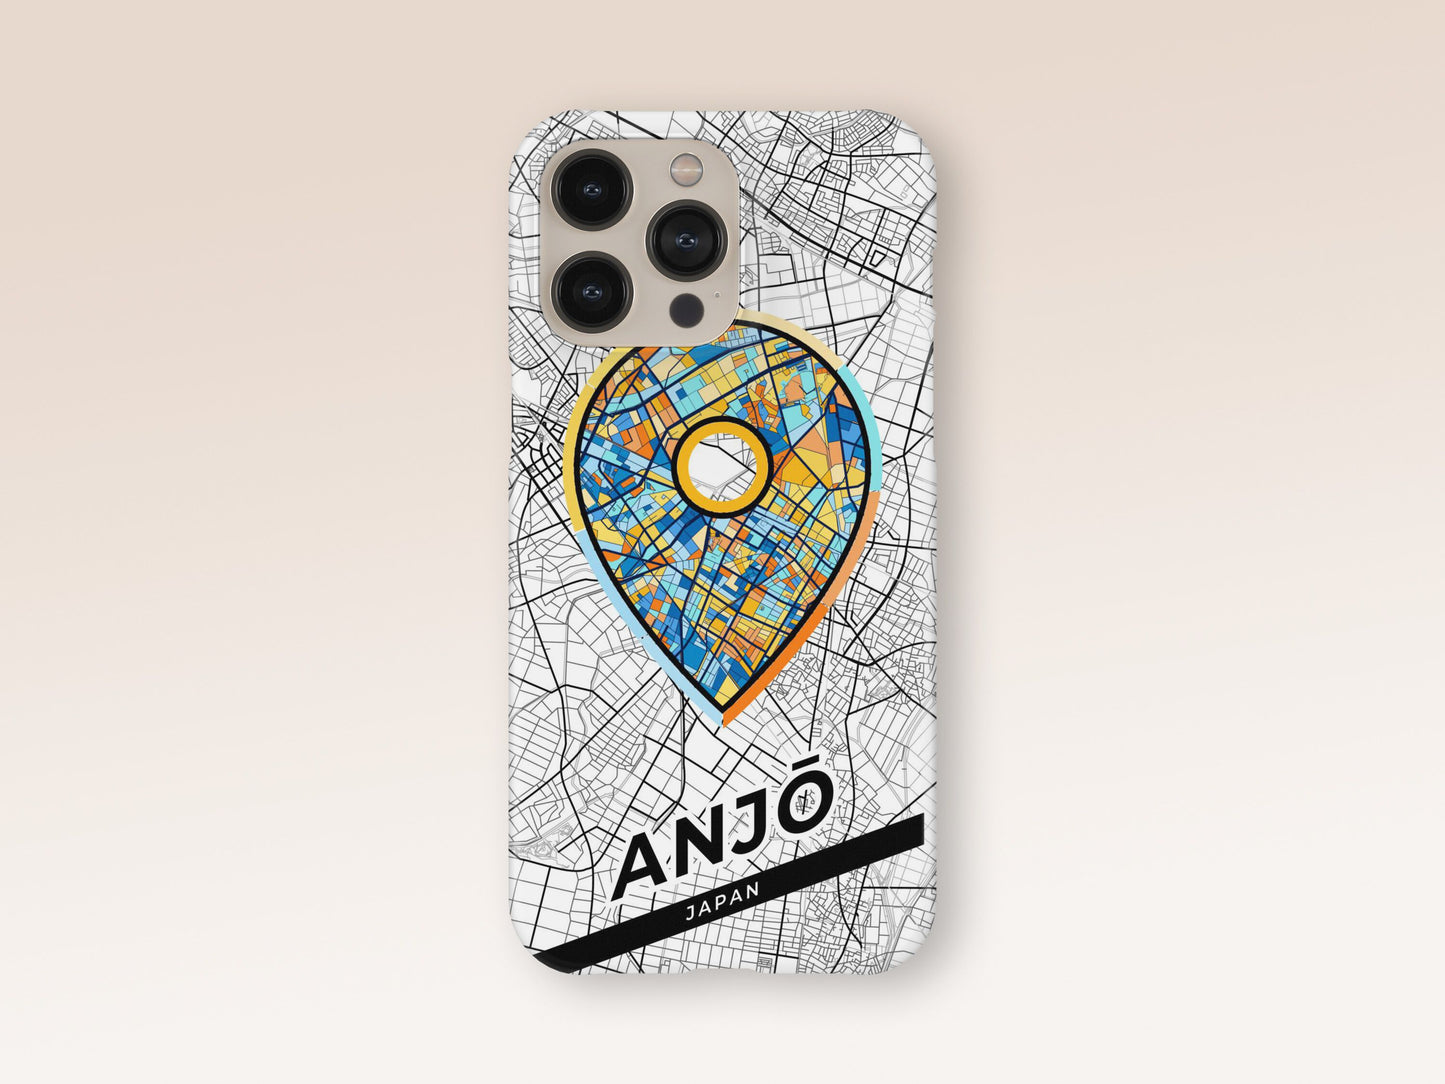 Anjō Japan slim phone case with colorful icon. Birthday, wedding or housewarming gift. Couple match cases. 1